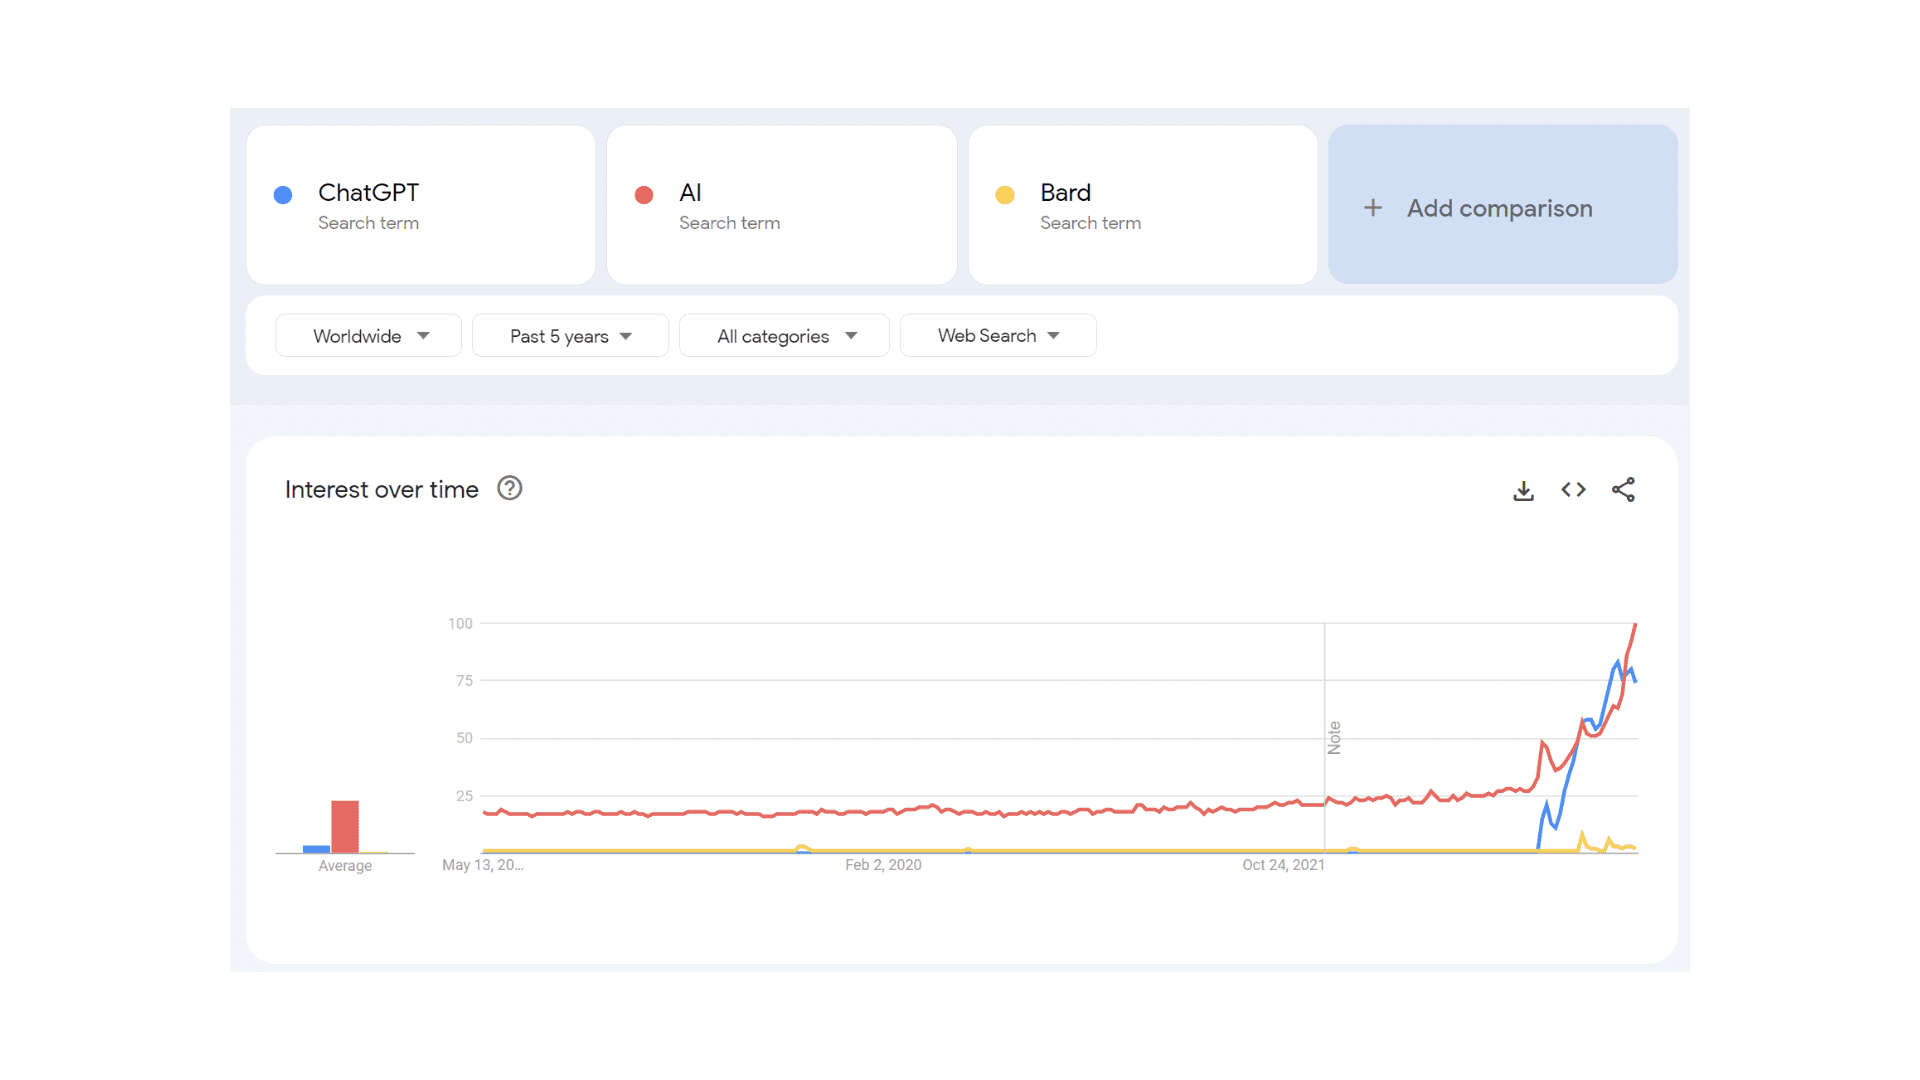 Image showing Google trend data for ChatGPT vs AI vs Bard search terms